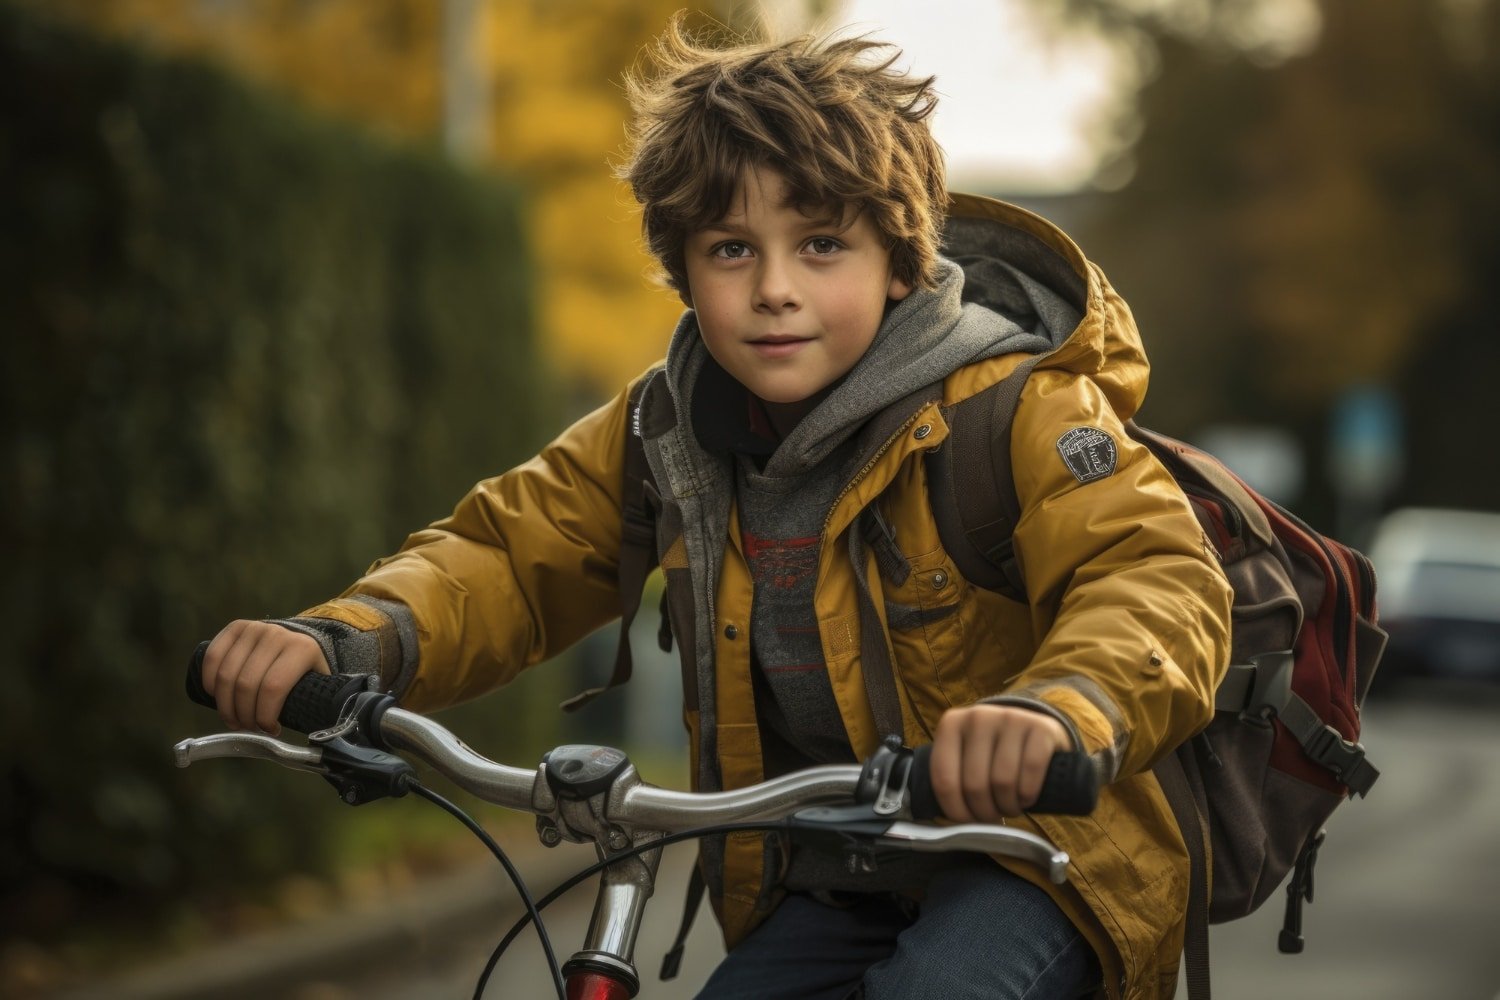 Guardian Bikes Safety First: The Ultimate Kids’ Bike